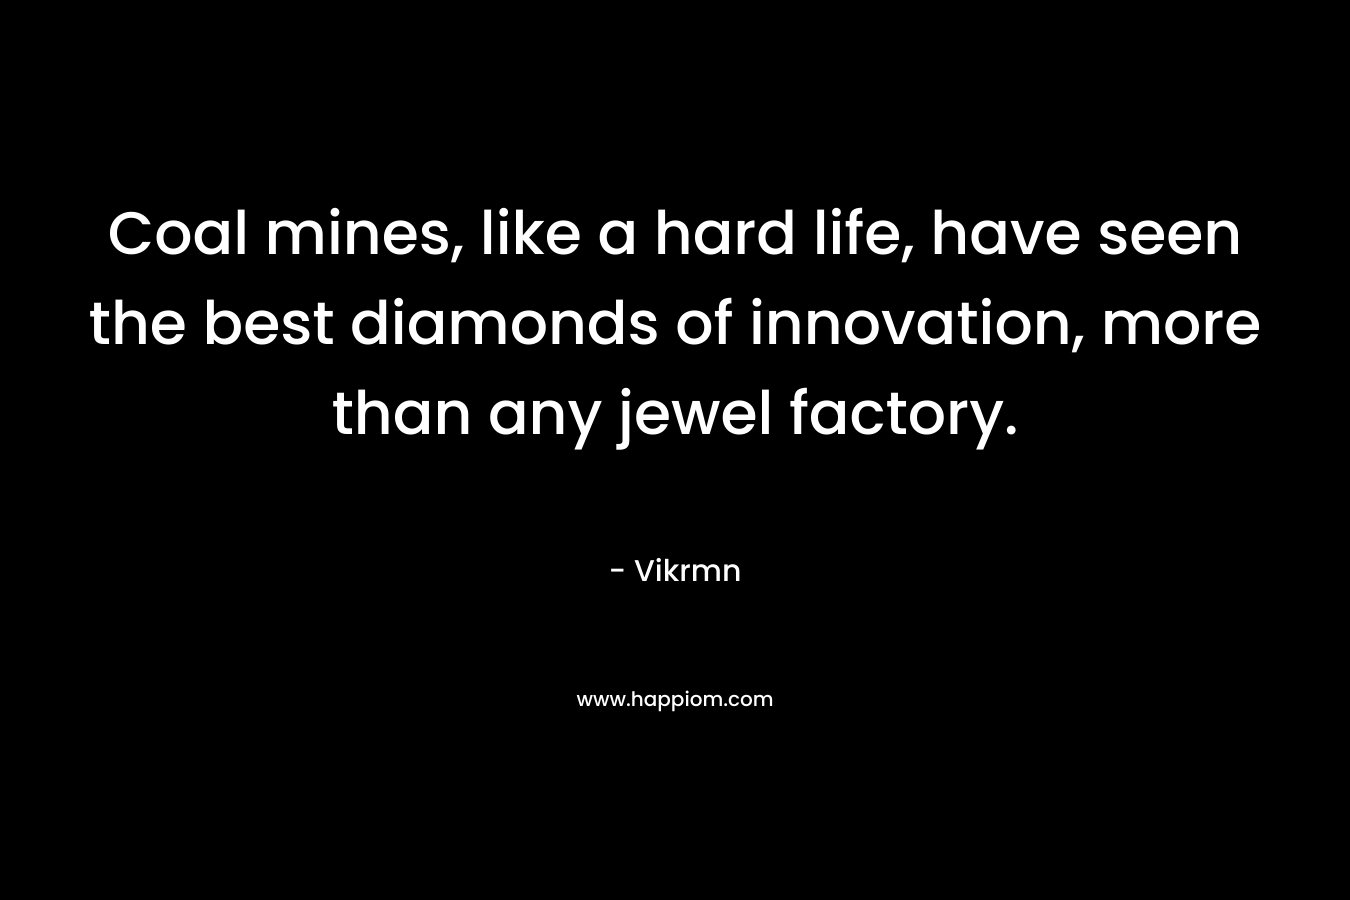 Coal mines, like a hard life, have seen the best diamonds of innovation, more than any jewel factory. – Vikrmn